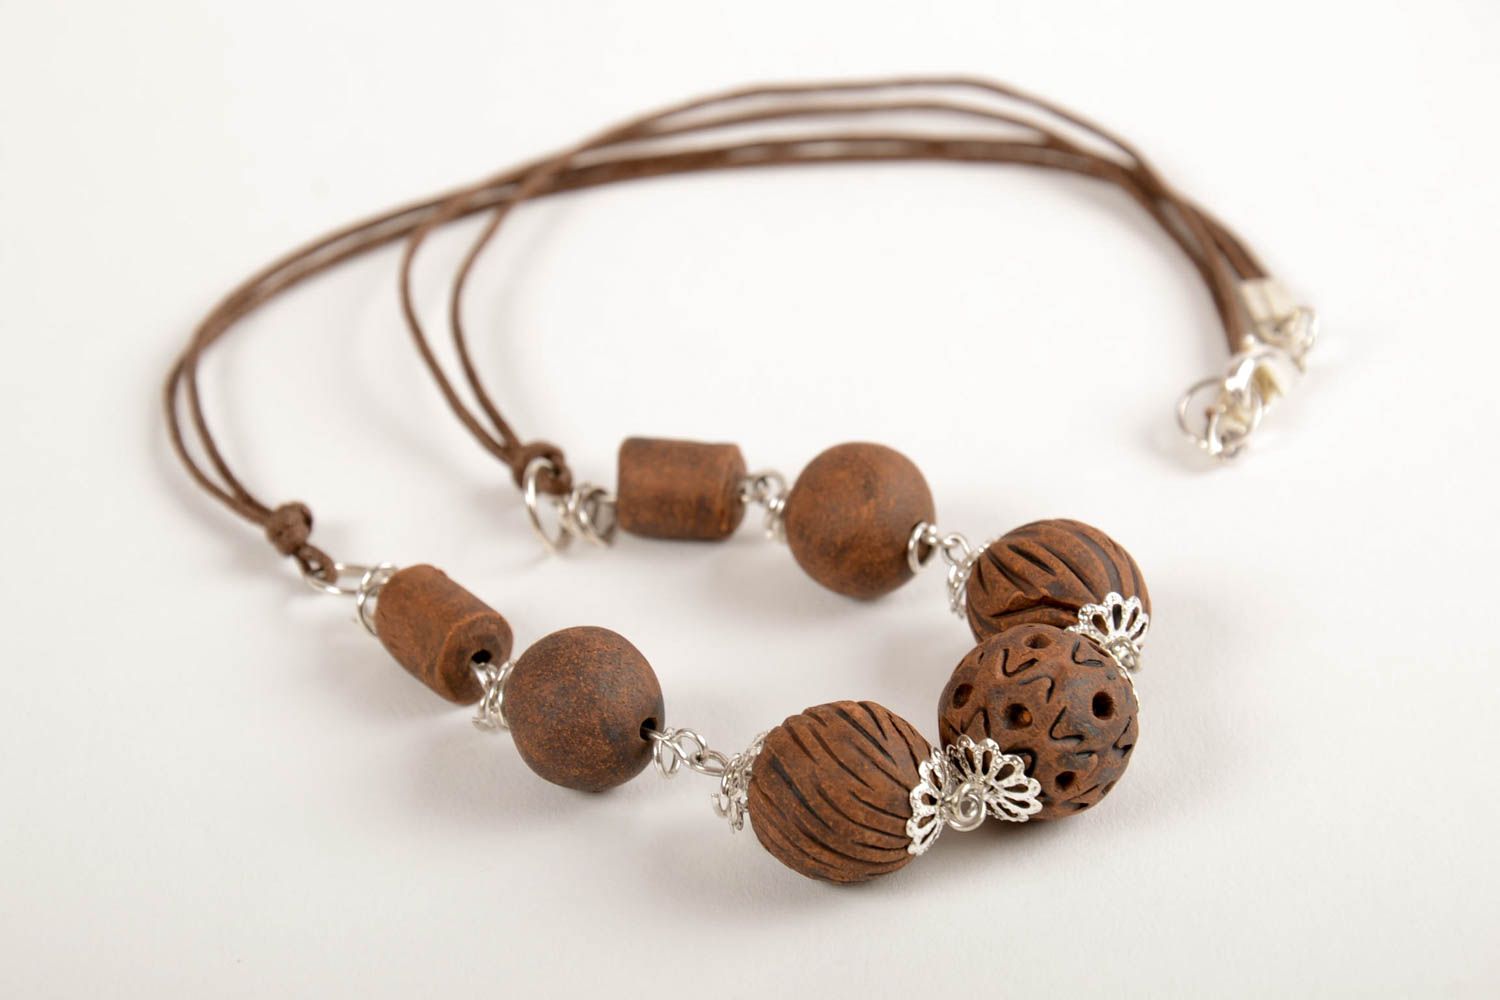 Handmade clay necklace clay jewelry ceramic accessories beaded necklace photo 5